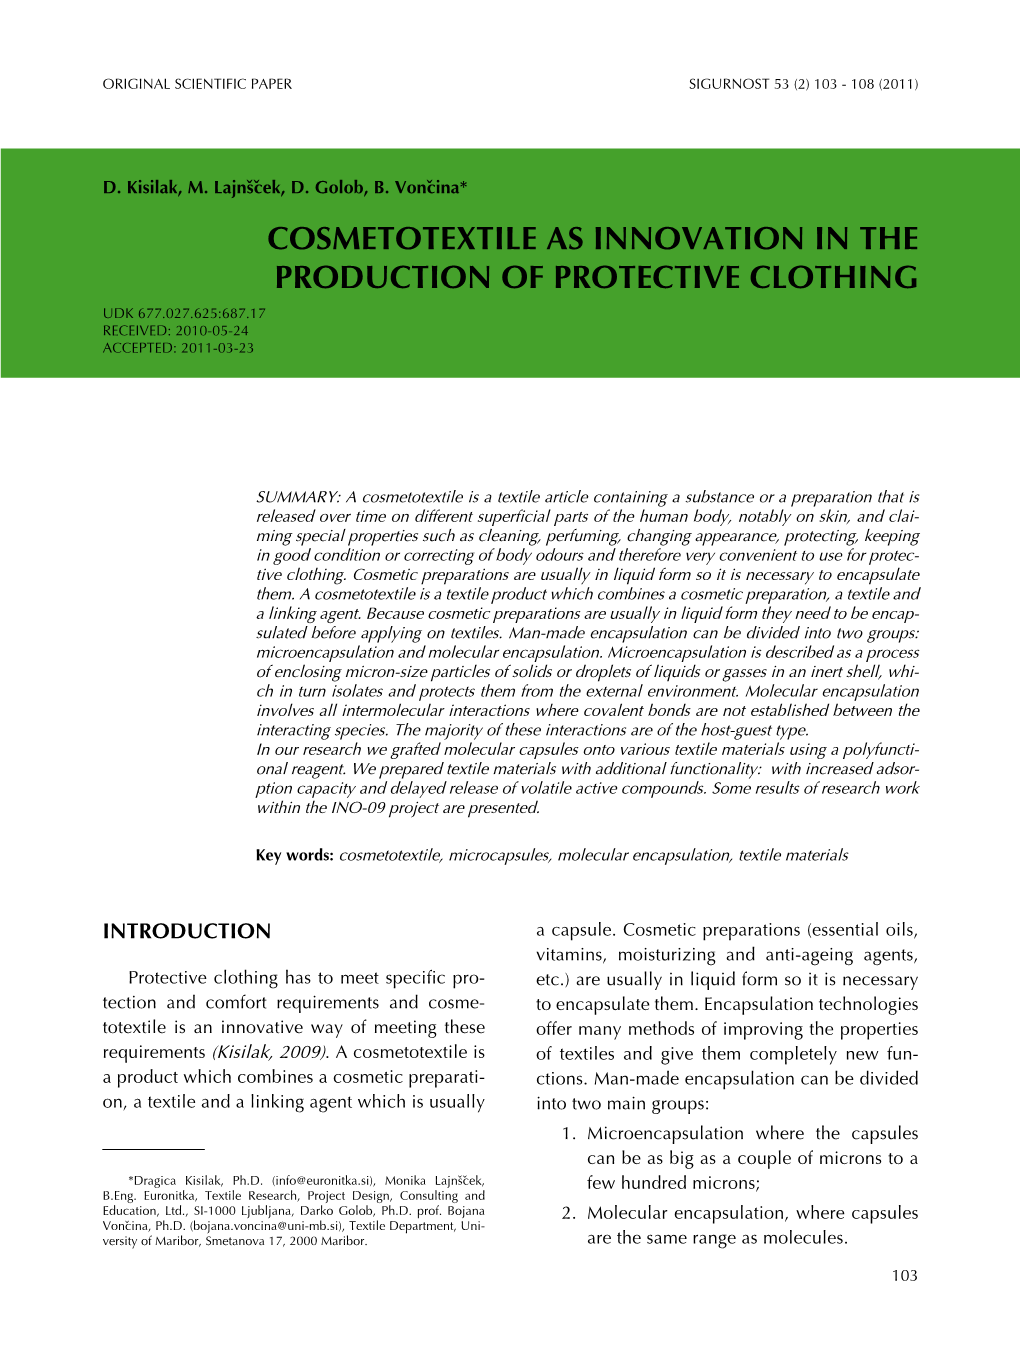 Cosmetotextile As Innovation in the Production of Protective Clothing Udk 677.027.625:687.17 Received: 2010-05-24 Accepted: 2011-03-23